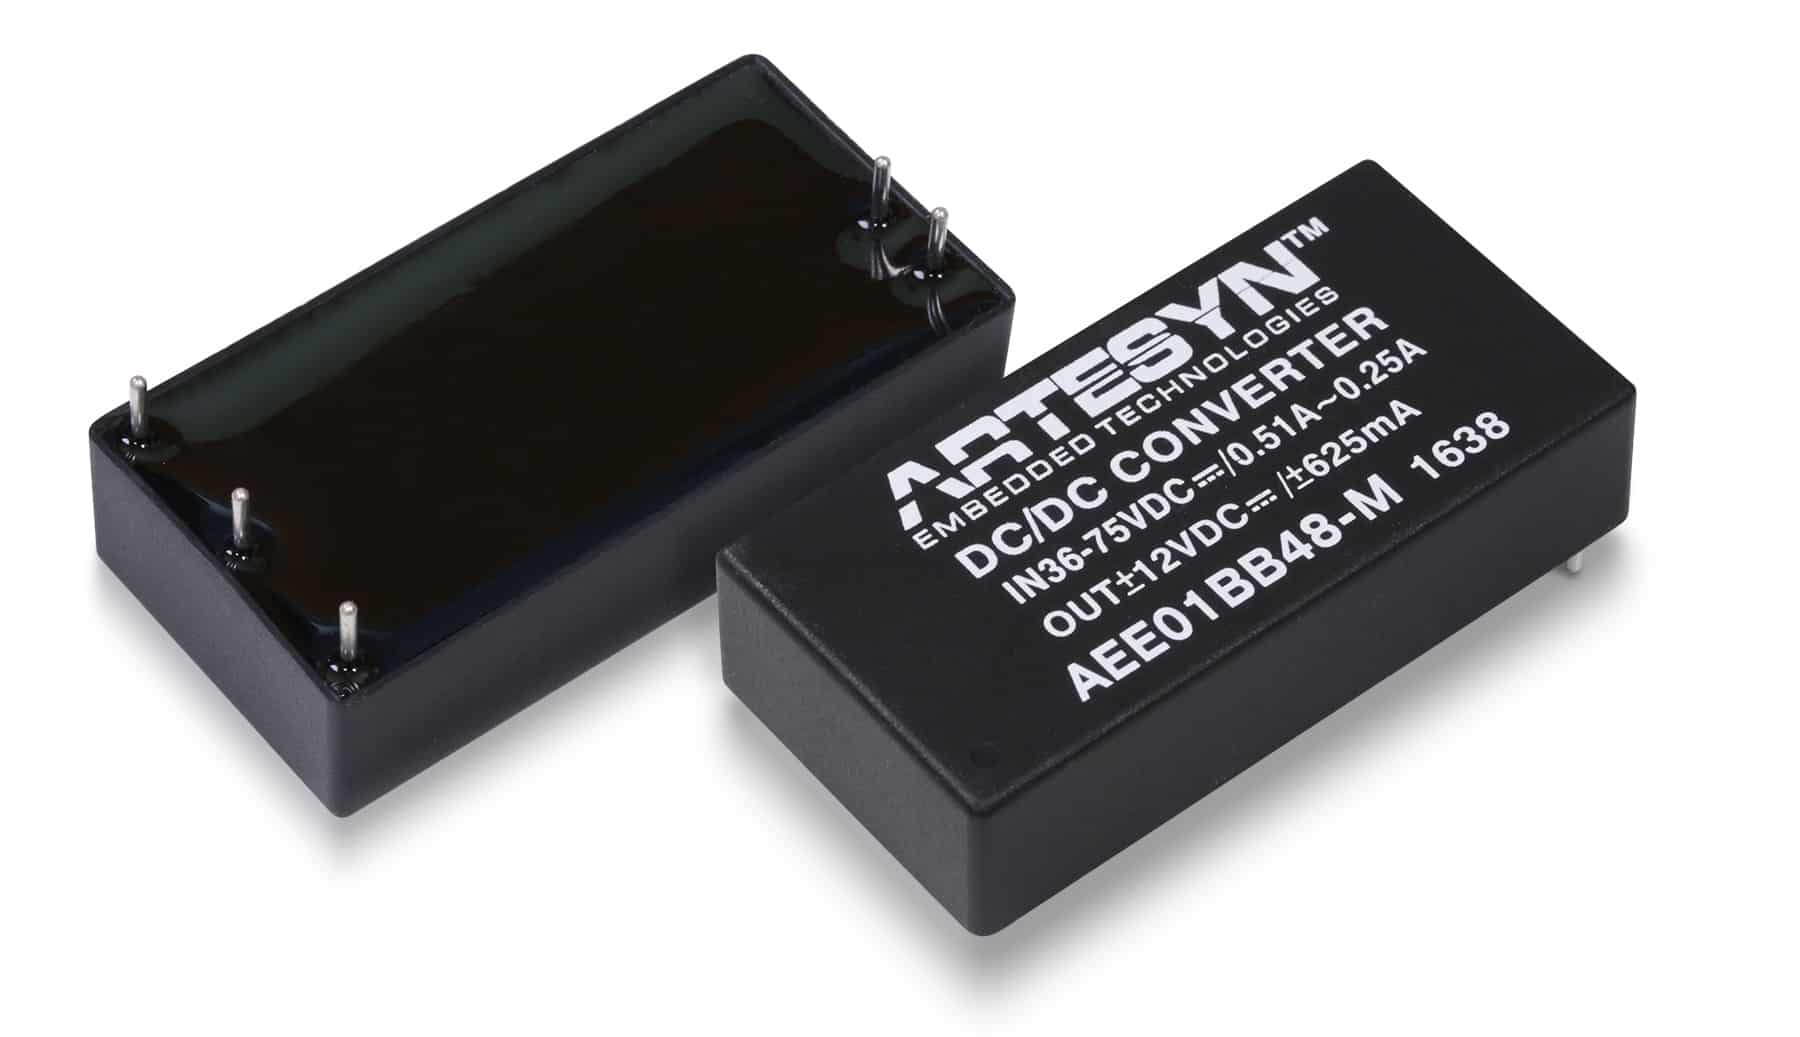 New 15 W and 20 W DC-DC Converters Feature Medical Safety Approvals